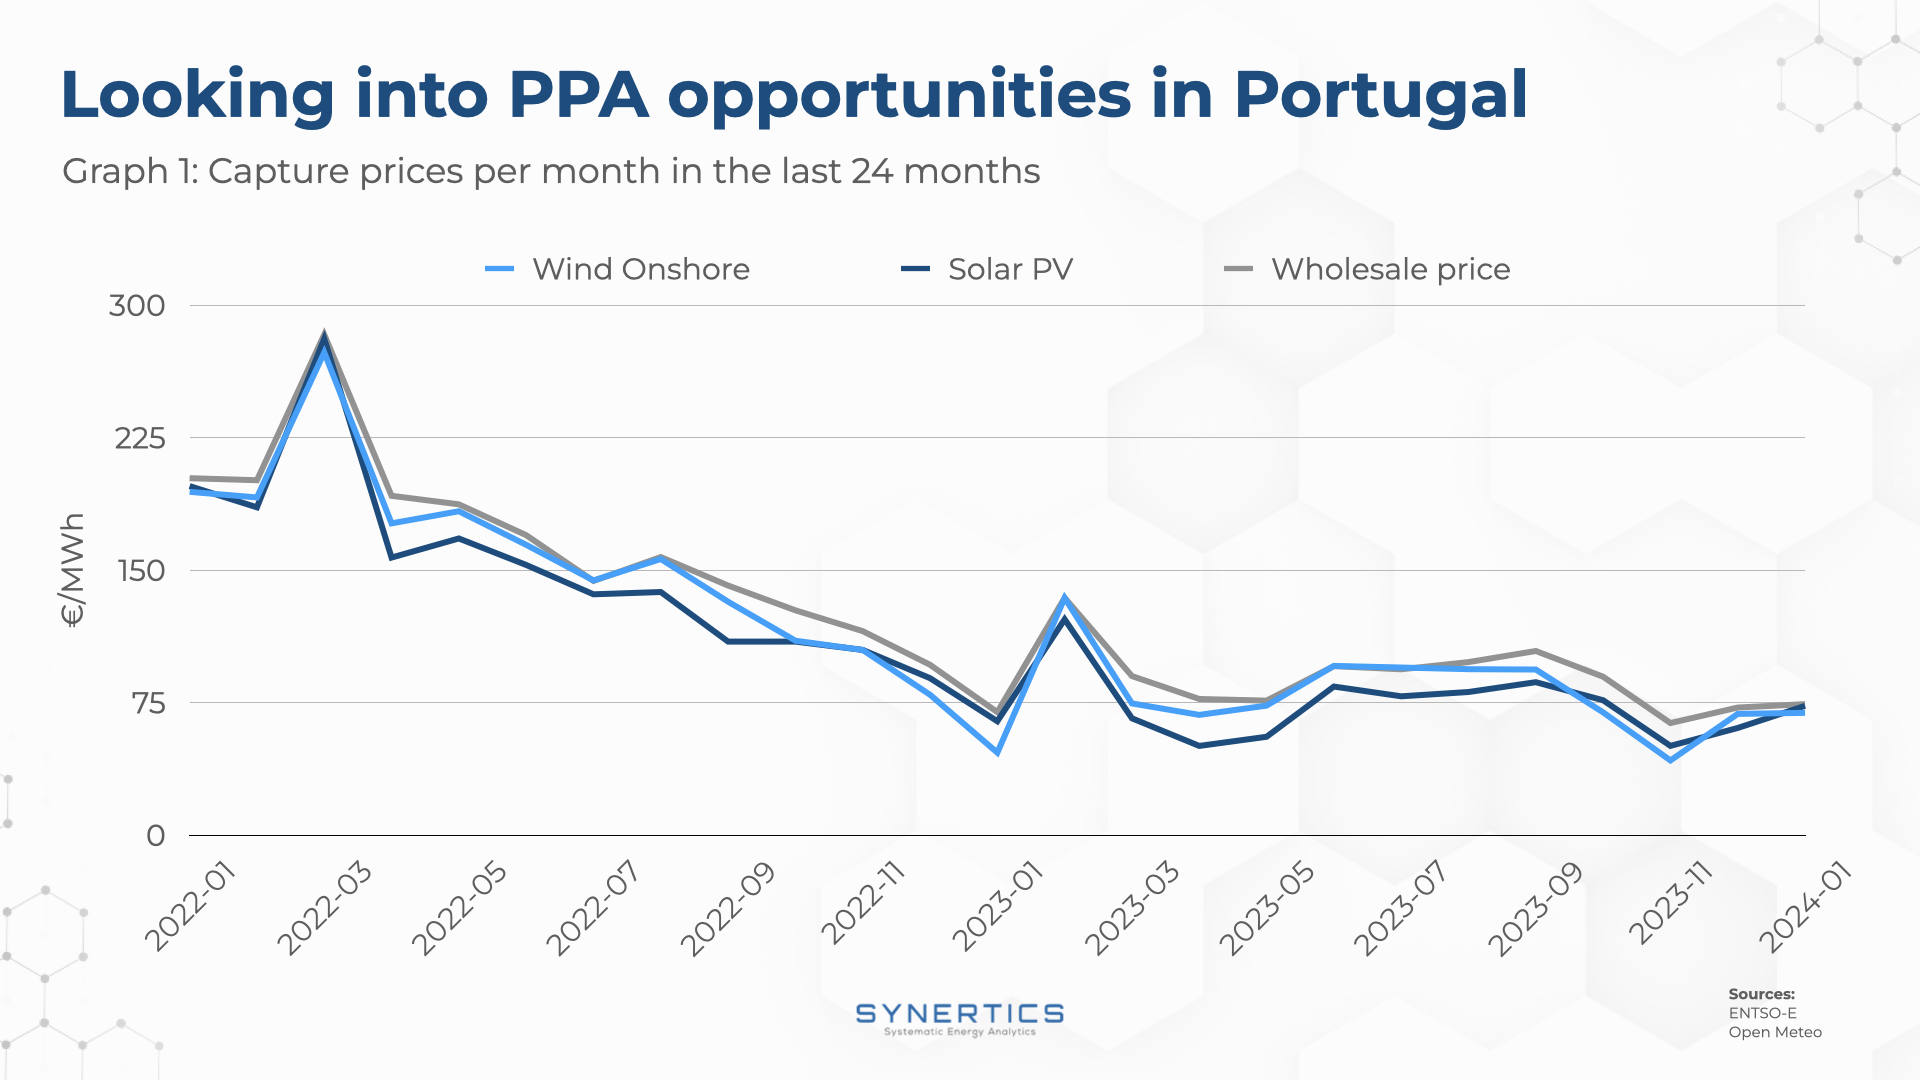 Capture prices in Portugal